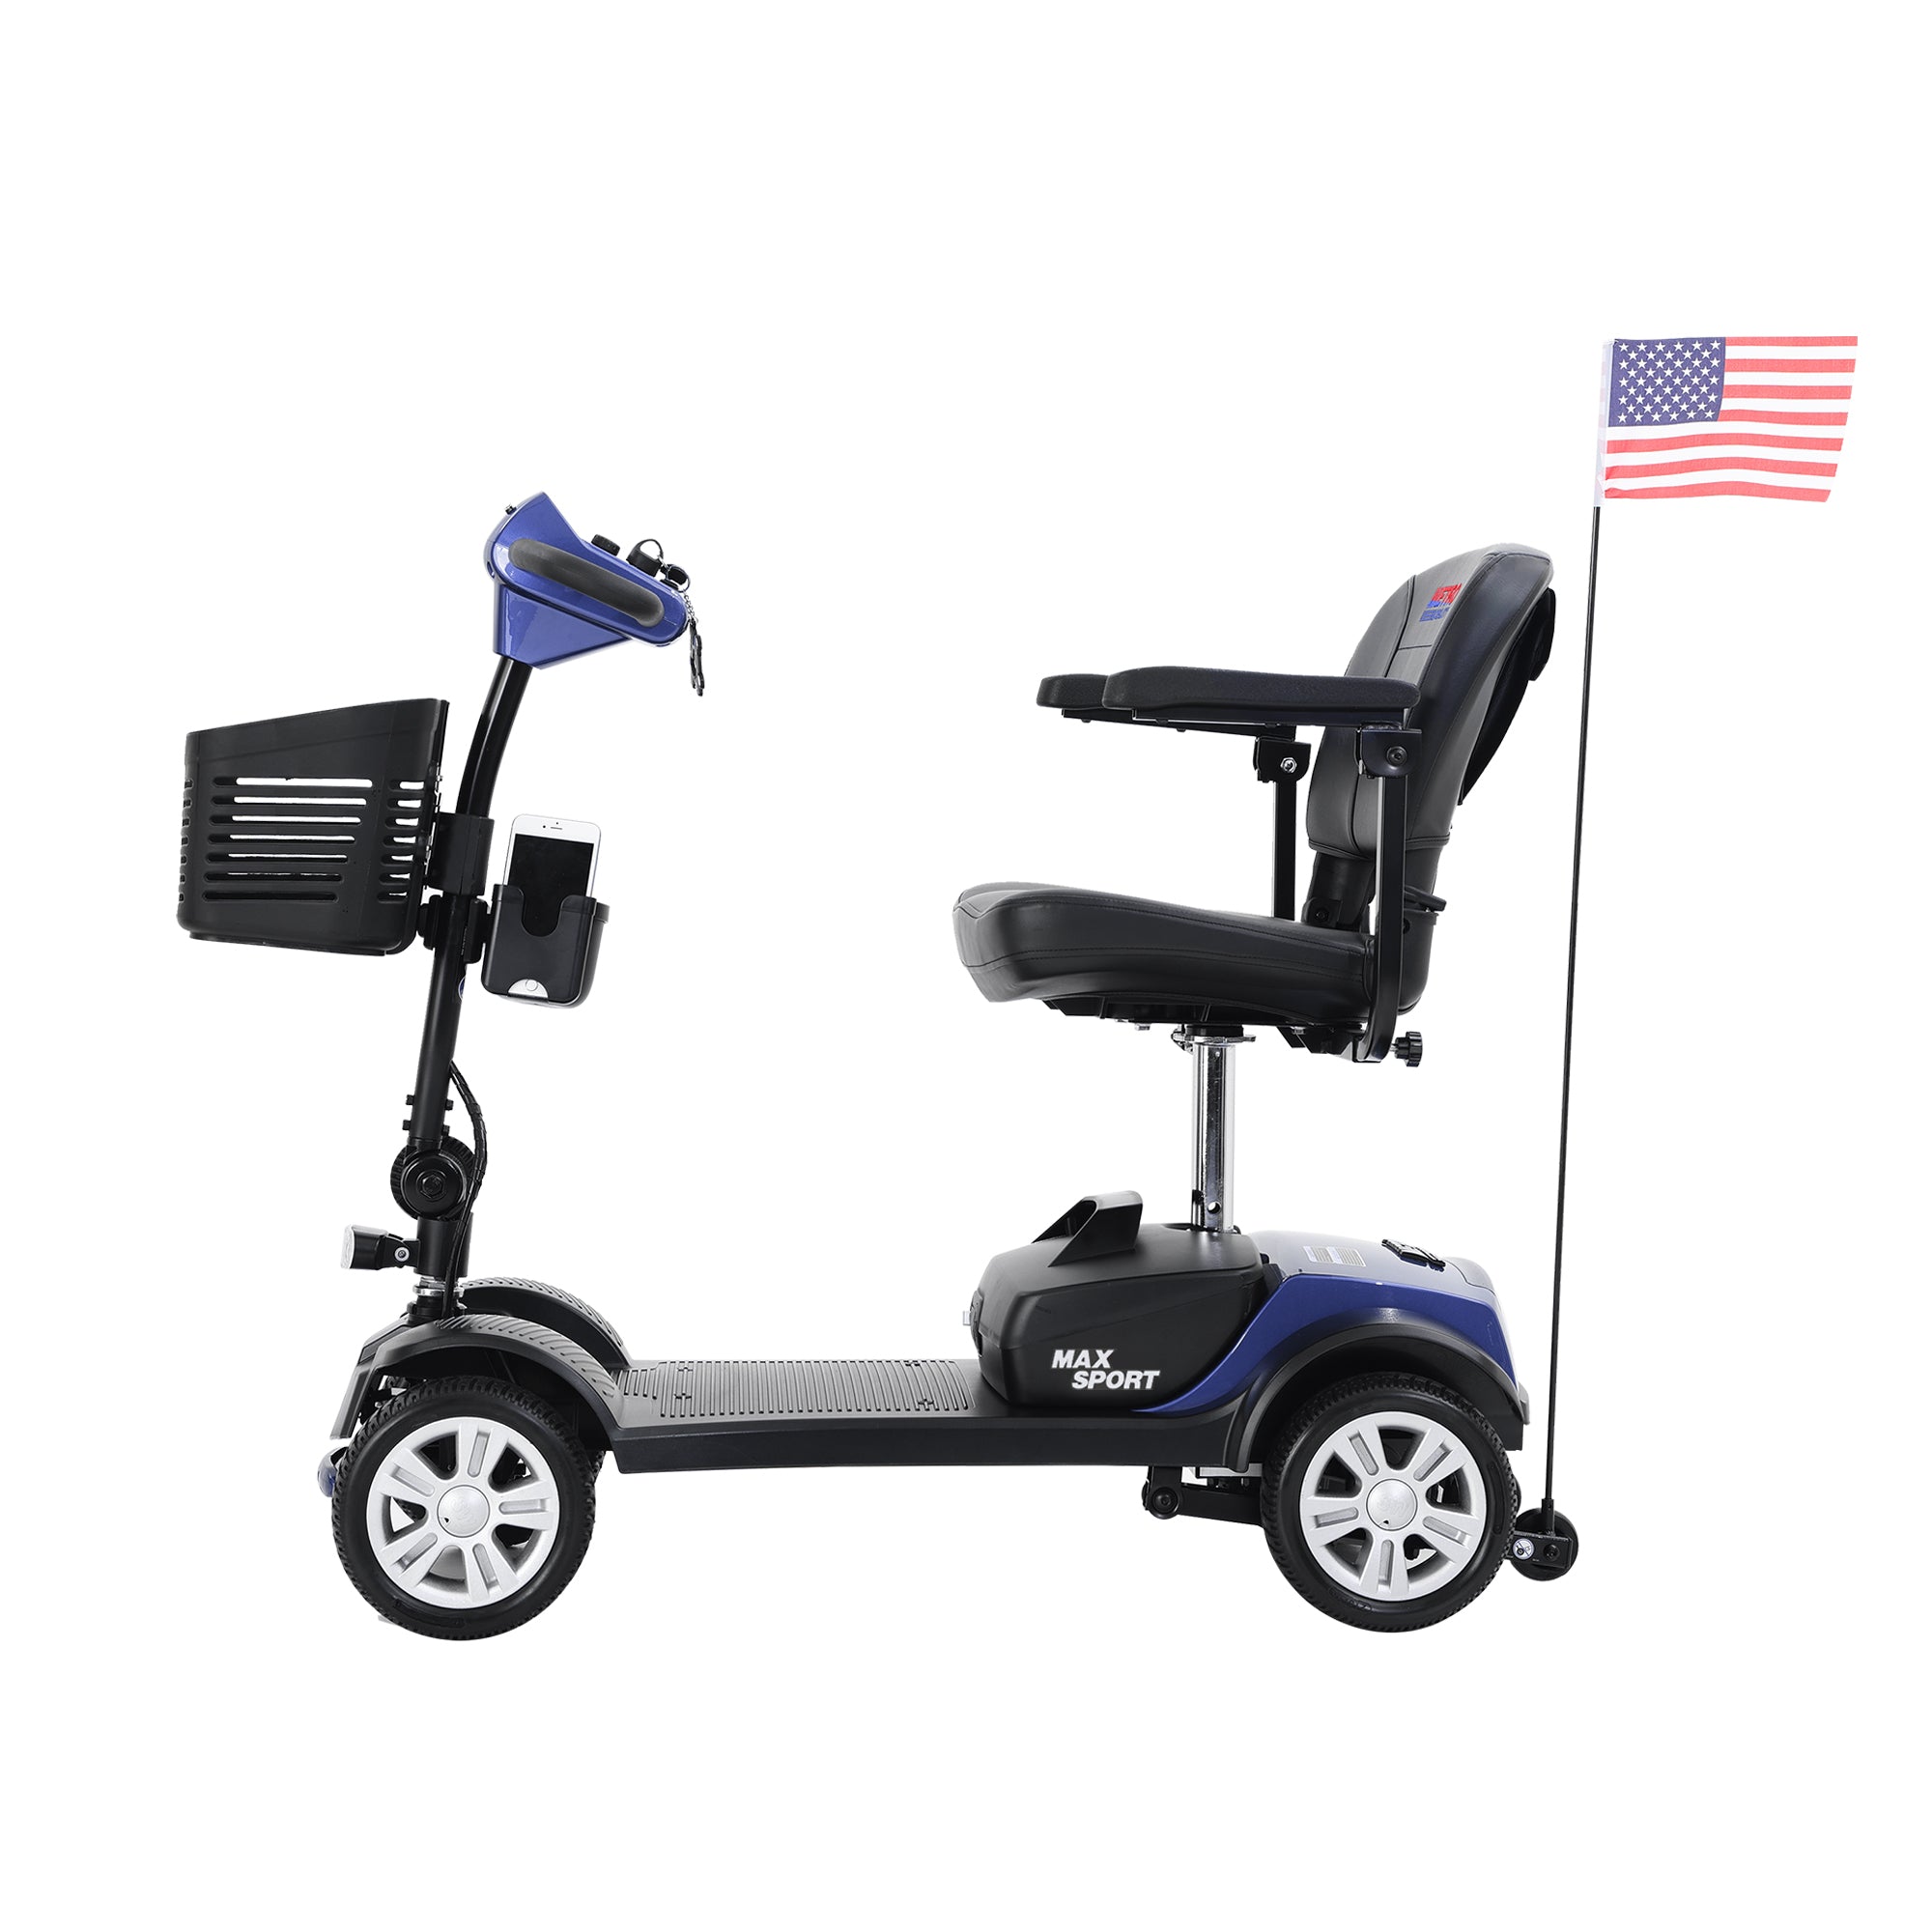 Suzicca SPORT BLUE 4 Wheels Outdoor Compact Mobility Scooter with 2 in 1 Cup & Phone Holder